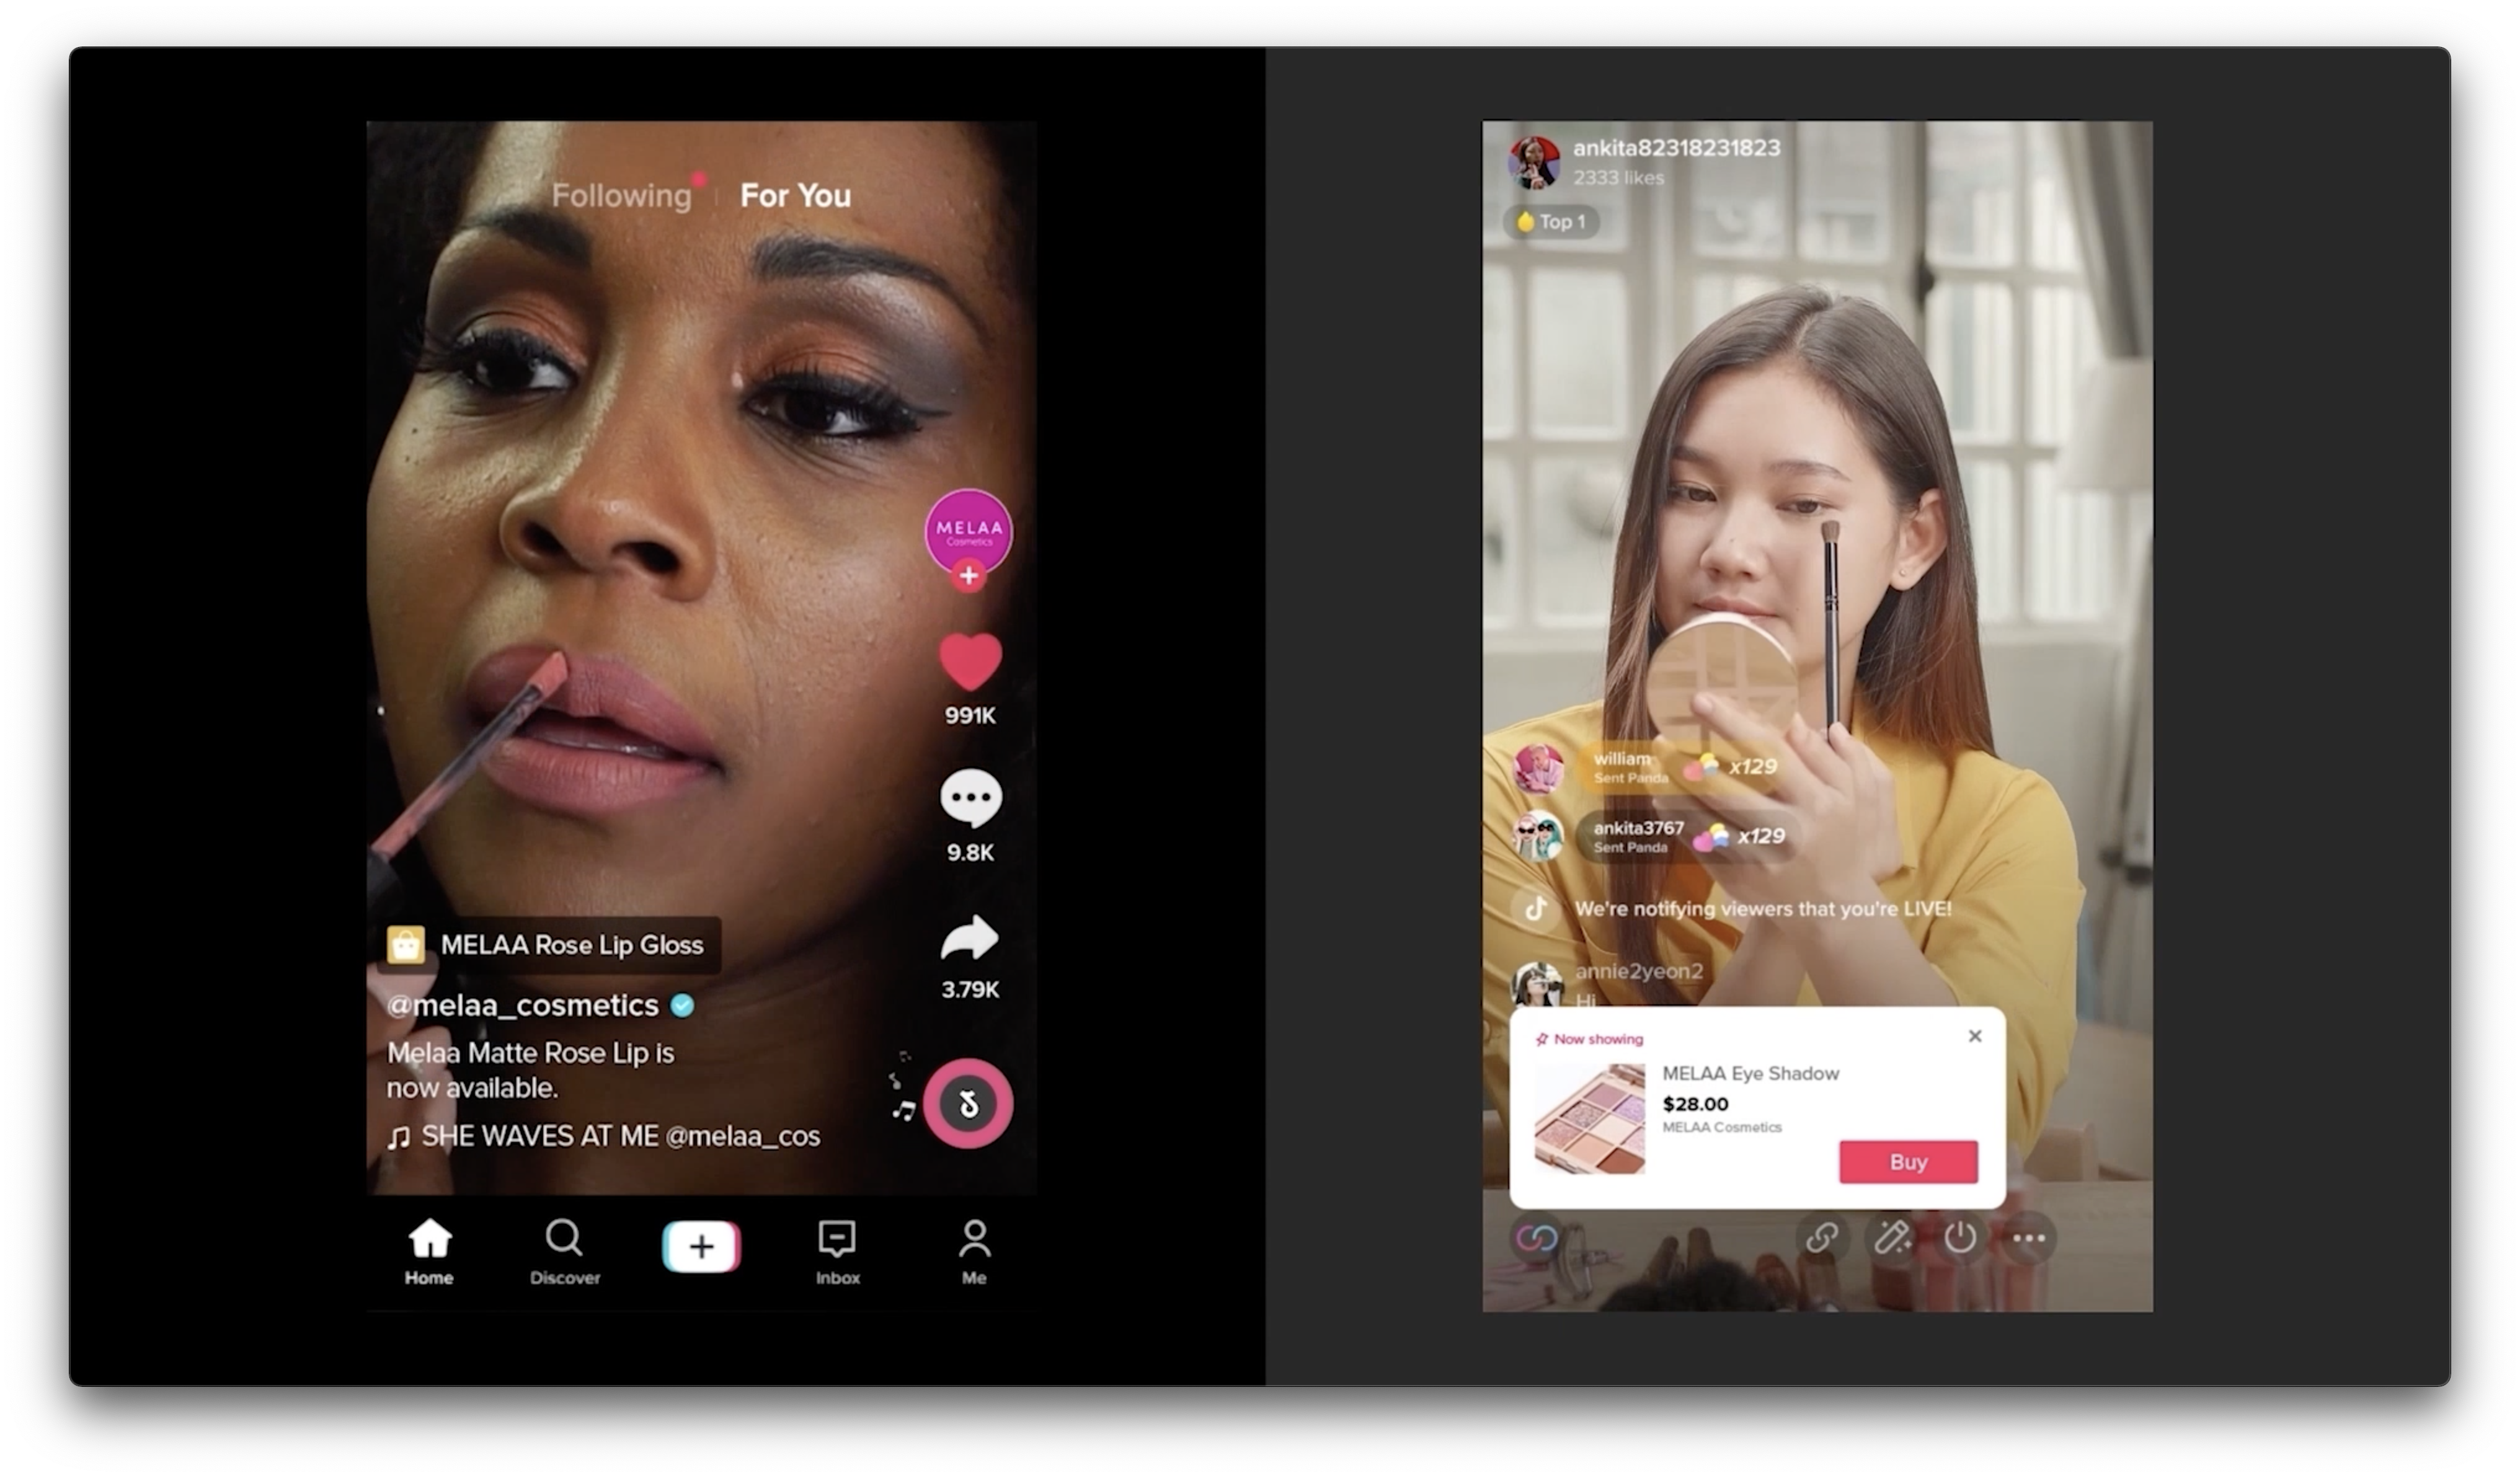 This Week in Apps: TikTok shops for advertisers, Microsoft makes app store changes, Apple’s apps get reviews